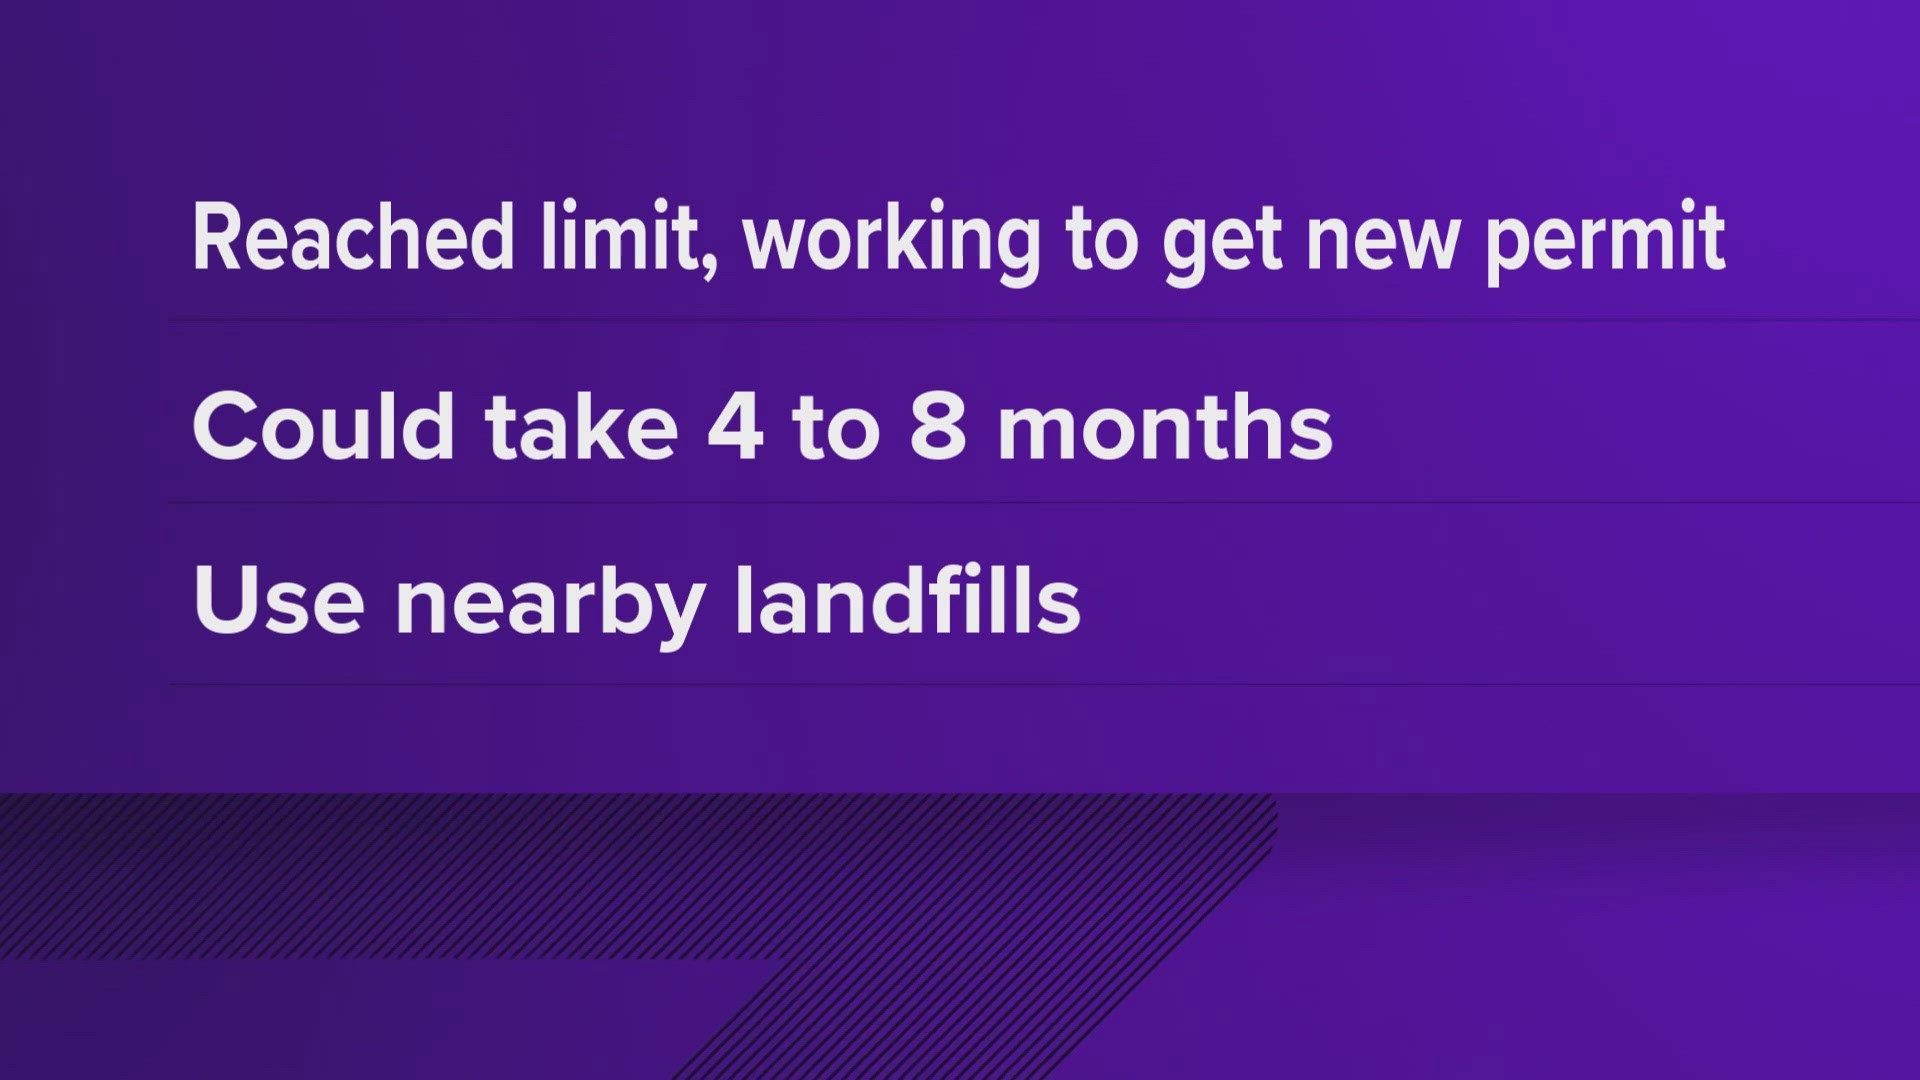 The county's landfill for construction debris and furniture reached its level recently. Businesses and contractors cannot bring their debris there as of Wednesday.